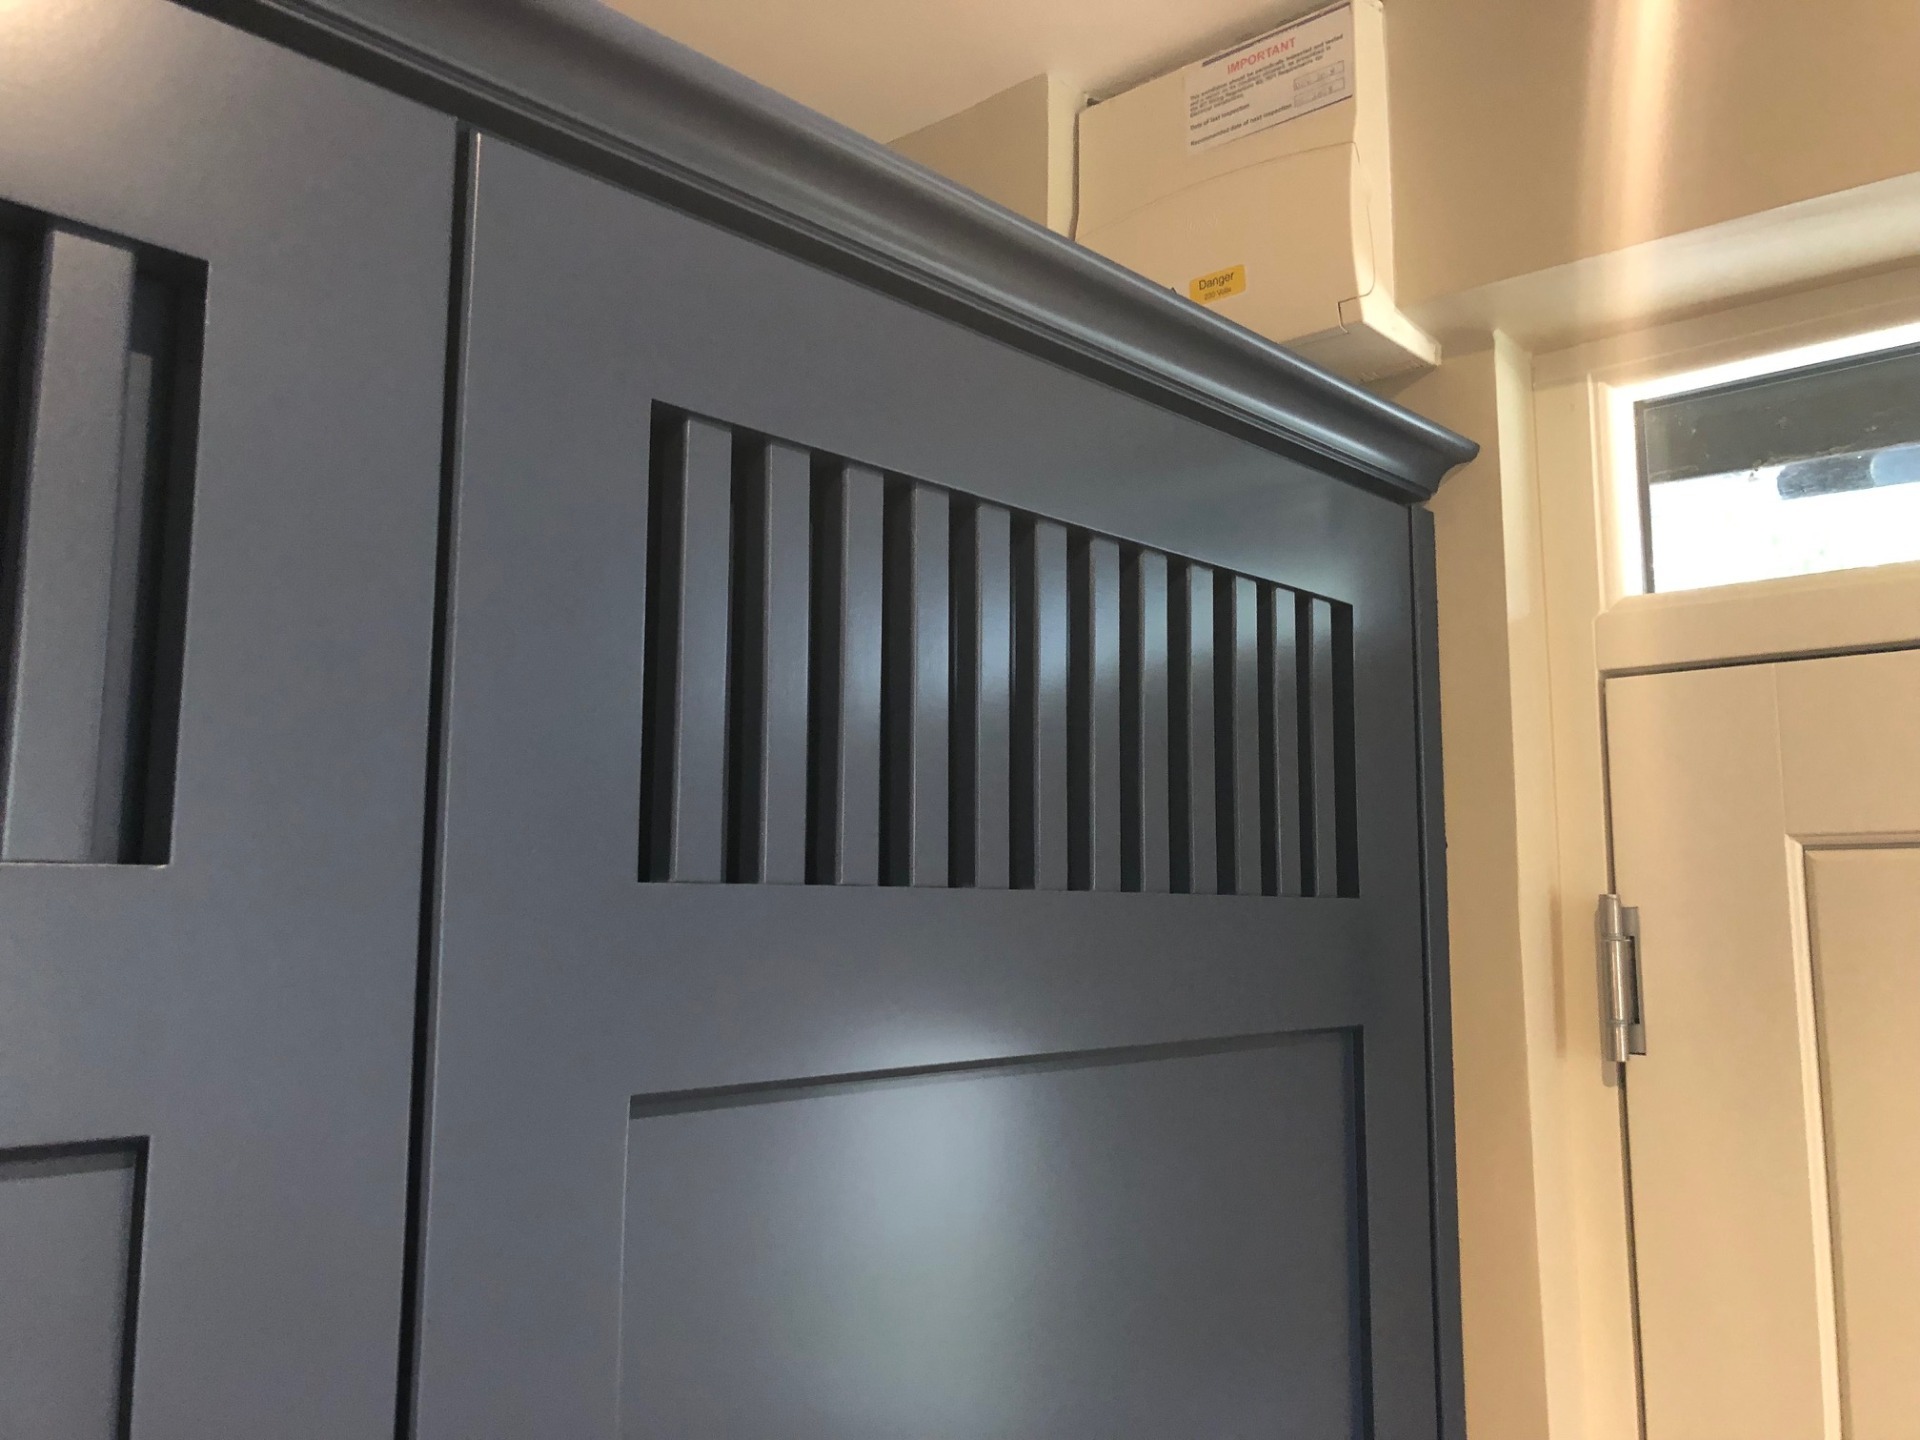 Ventilation for boot room cabinet